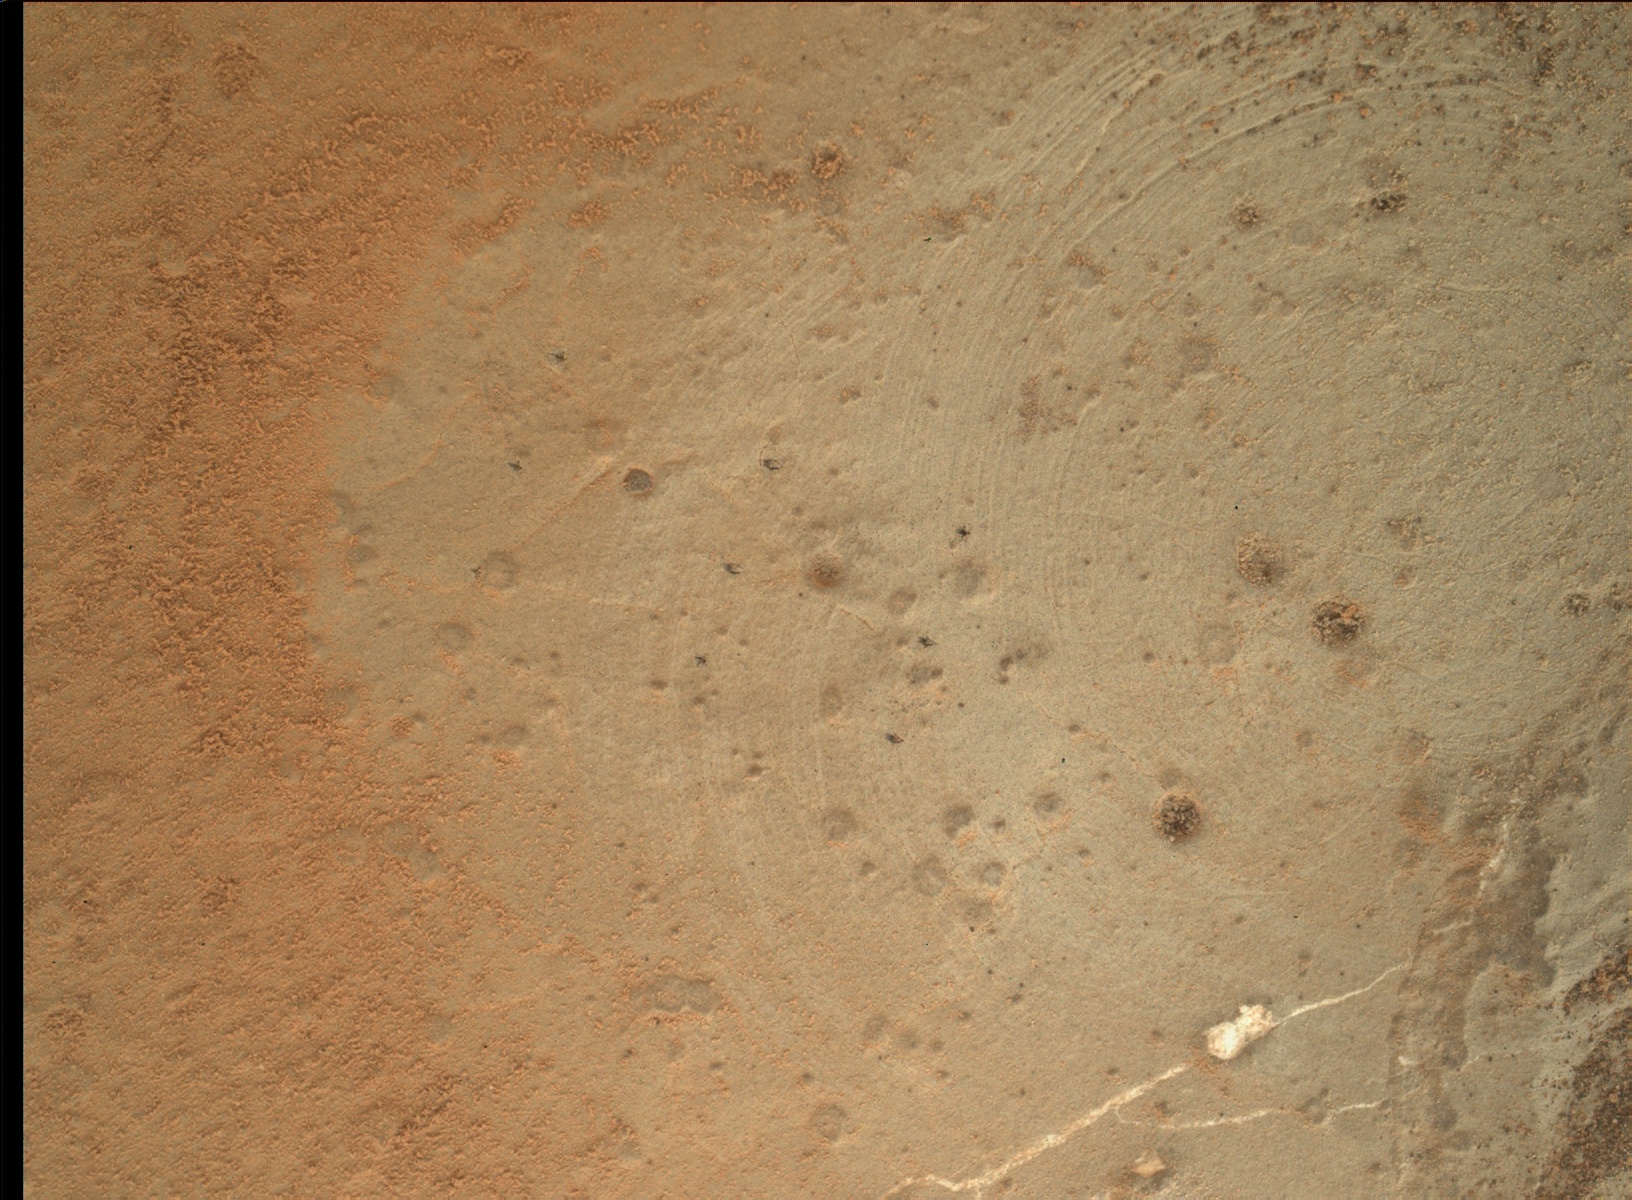 Nasa's Mars rover Curiosity acquired this image using its Mars Hand Lens Imager (MAHLI) on Sol 173